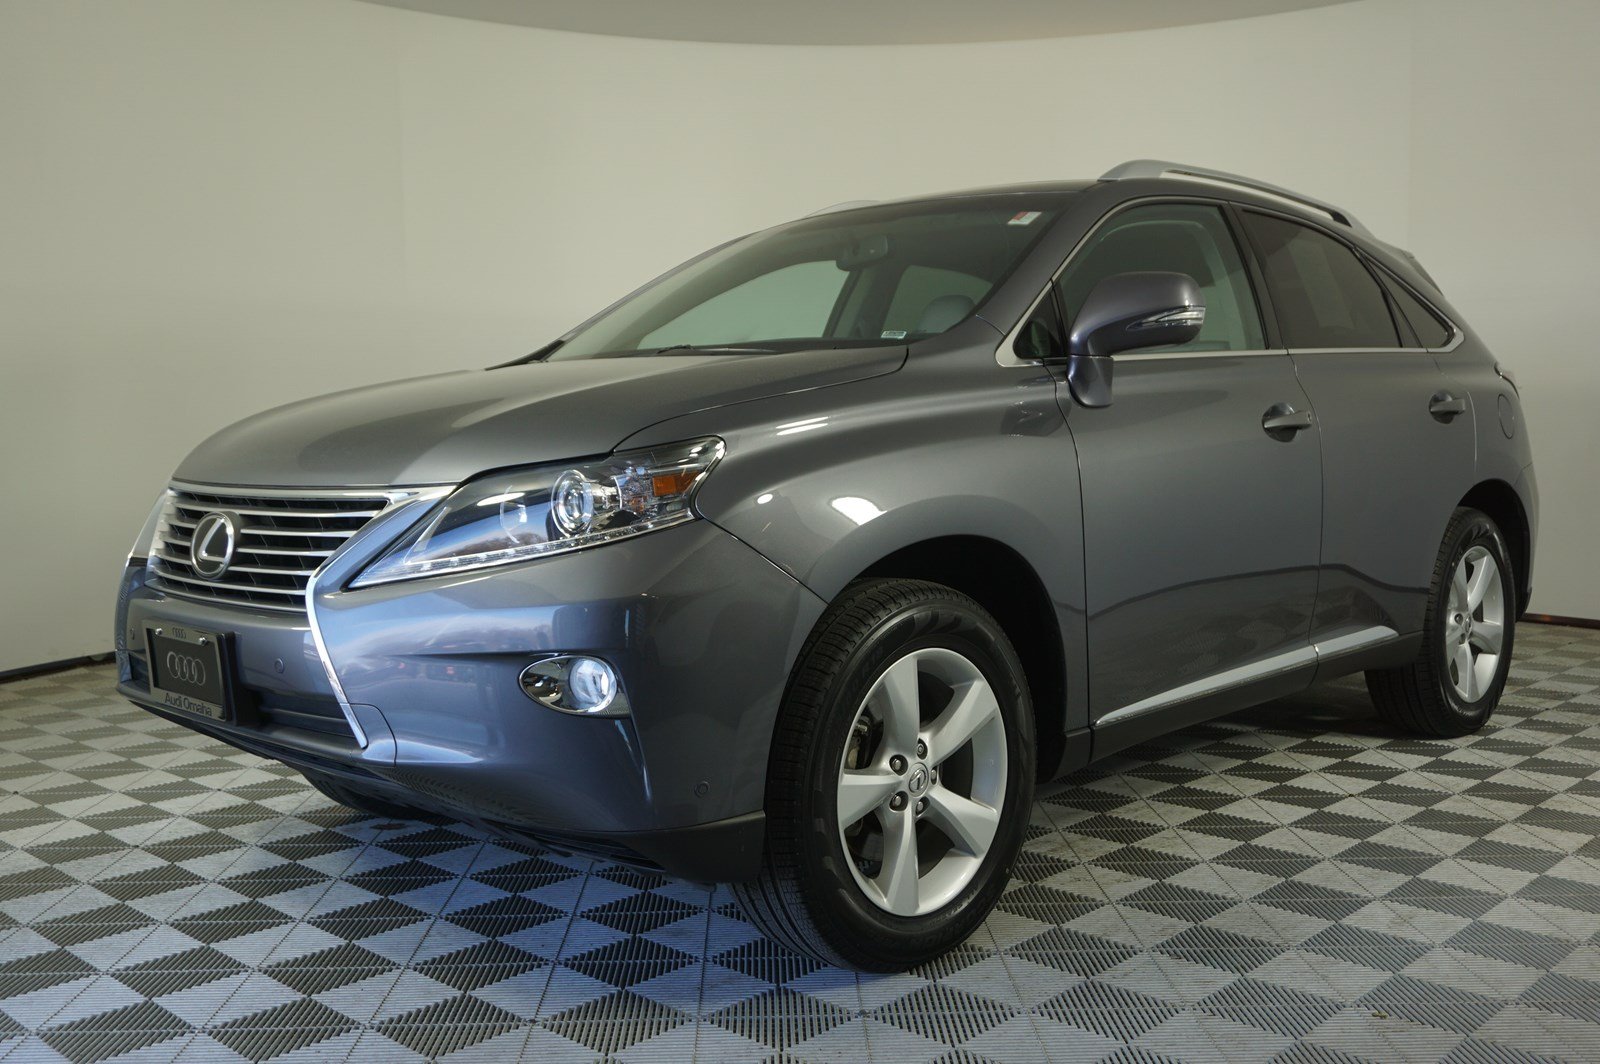 PreOwned 2015 Lexus RX 350 AWD 4dr in Kansas City P2482